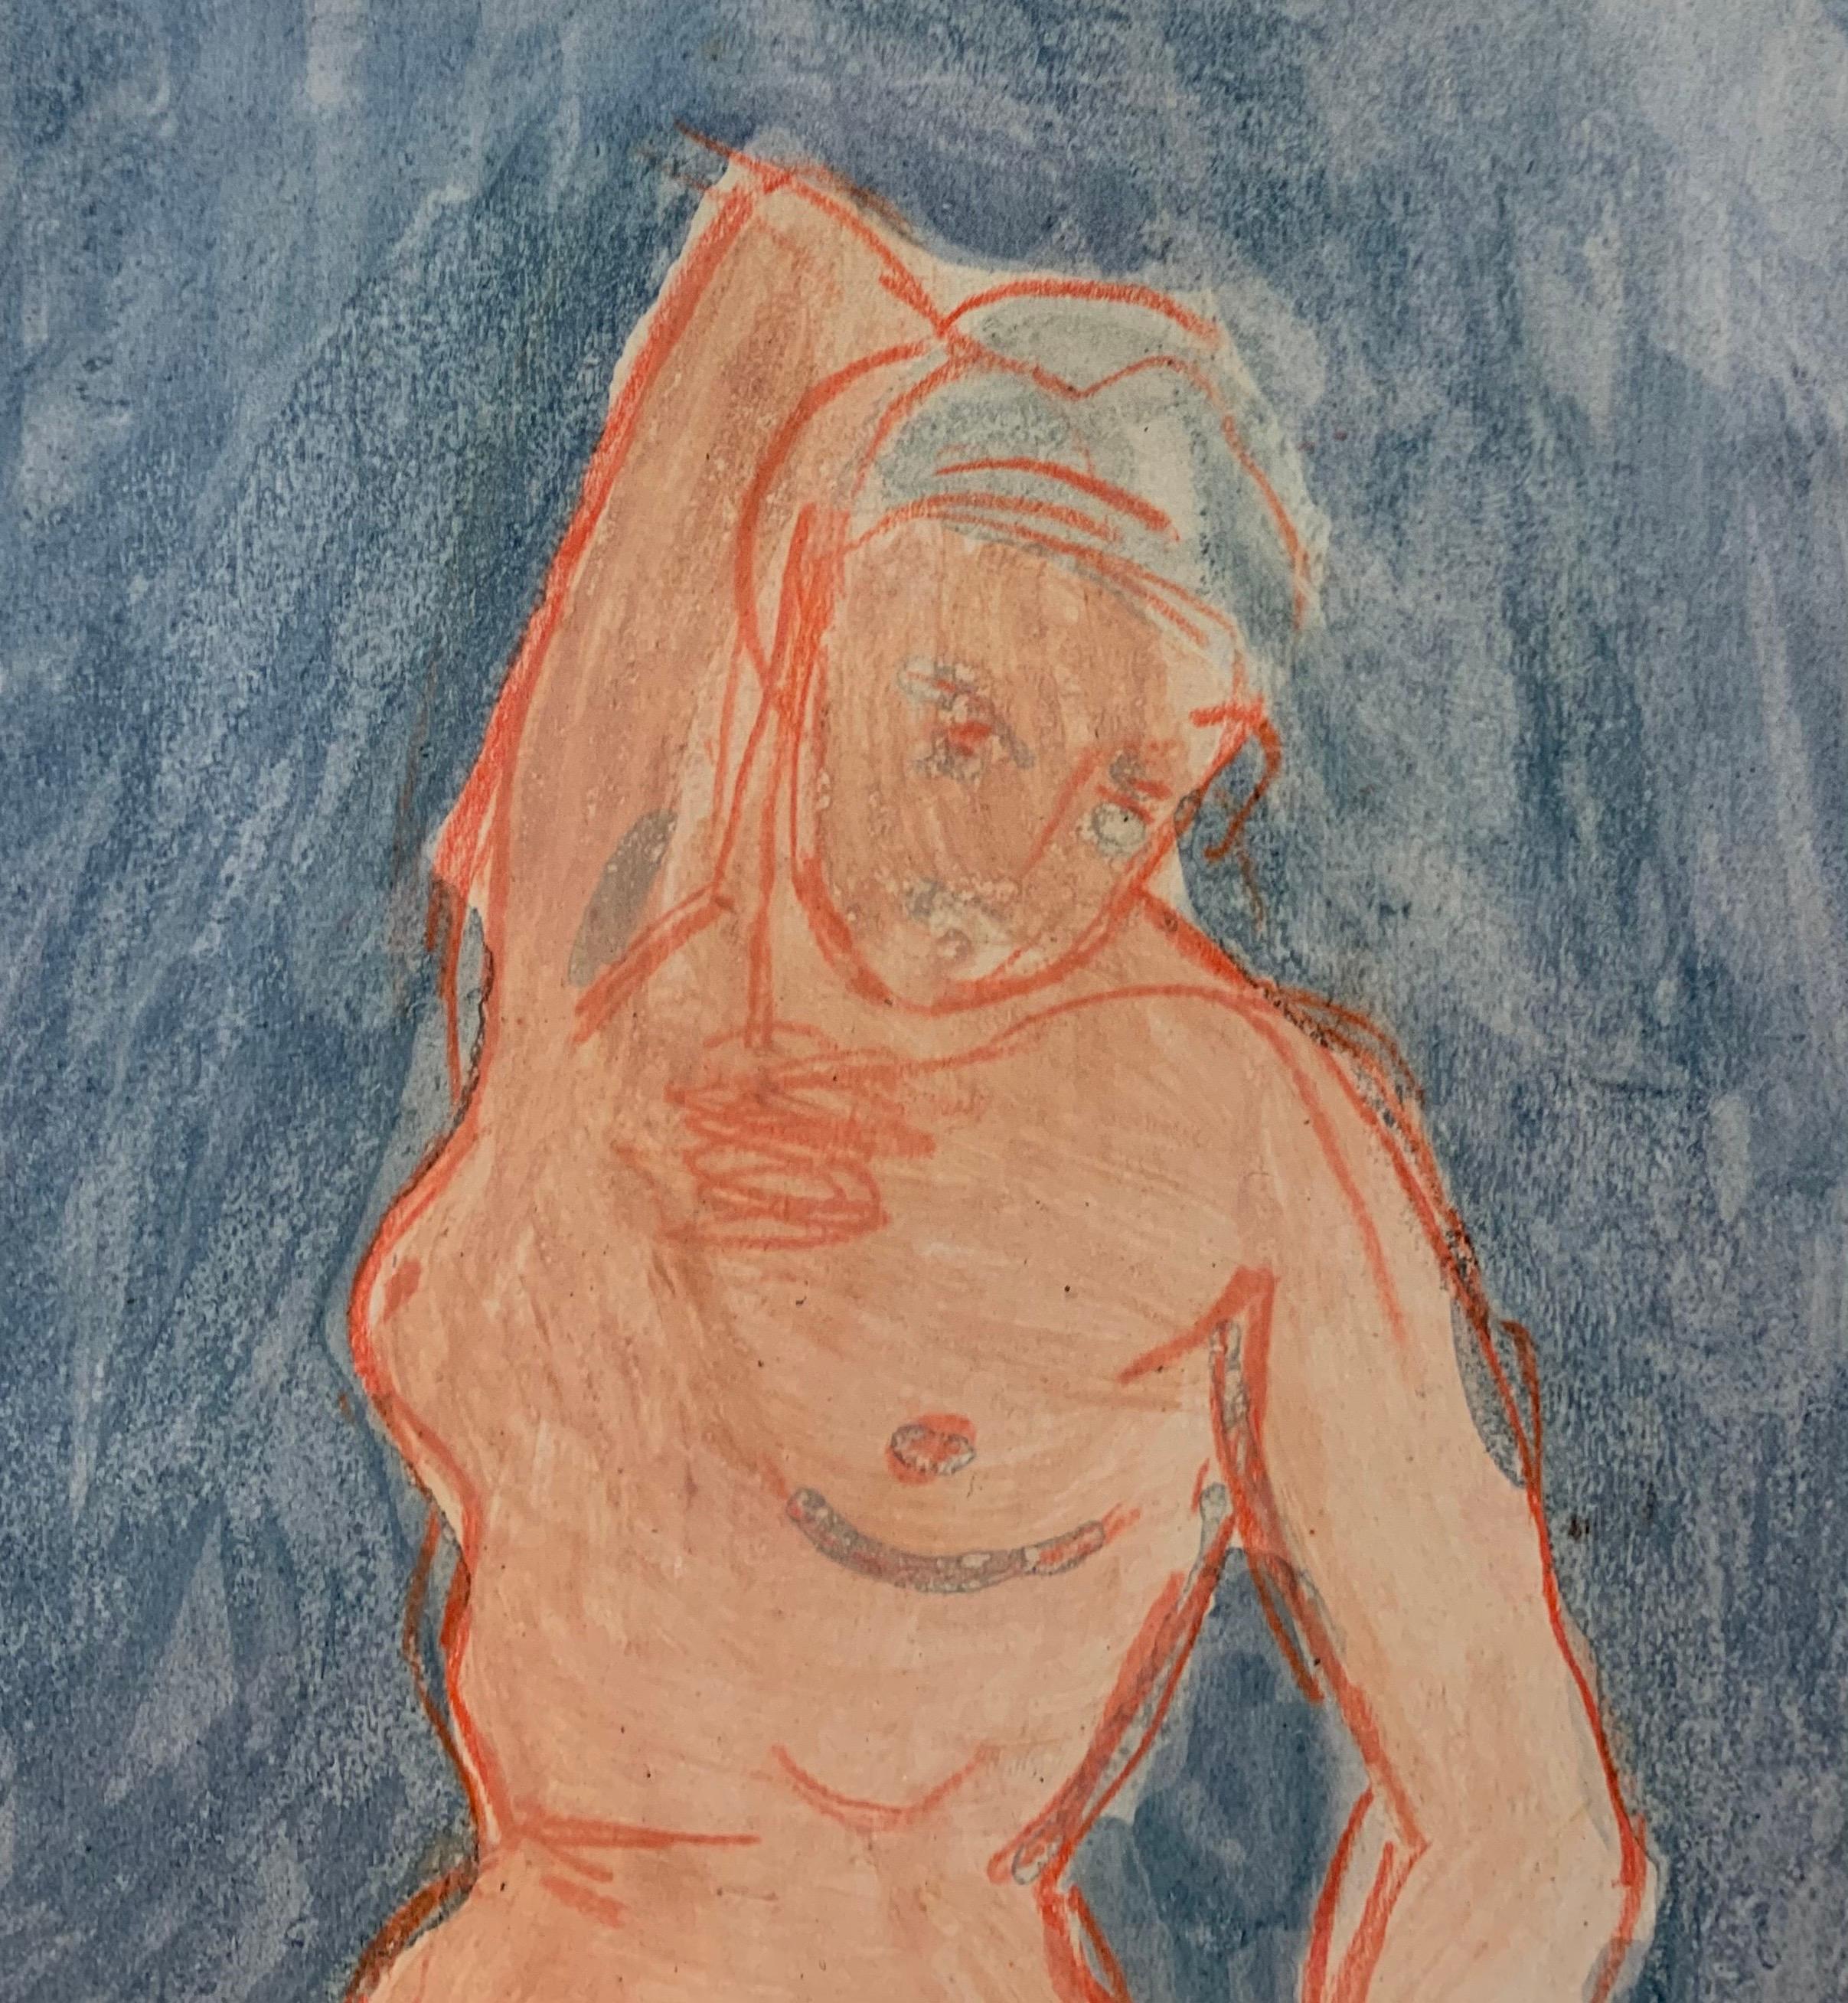 Nude pink, with blue background
Edgardo CORBELLI (Turin, 1918 - 1989)

From the traditional composition of the 1930s, the painting of Corbelli leads to technical and expressive results dominated by an impetuous sign assimilated, among others, by